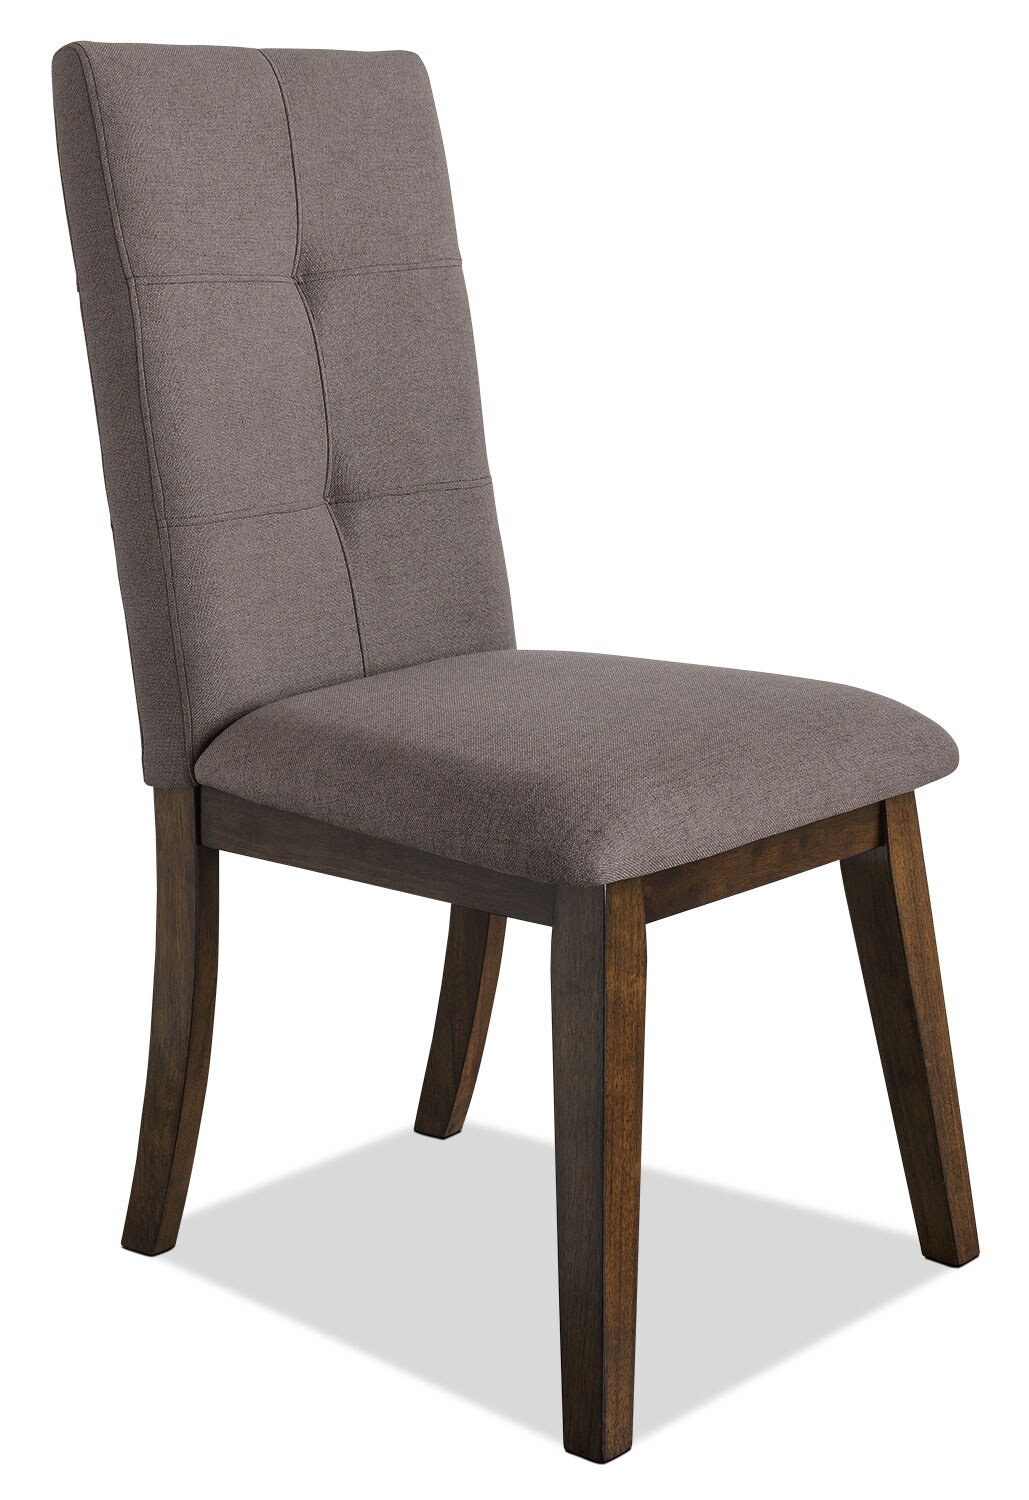 Chelsea Fabric Dining Chair – Brown | The Brick